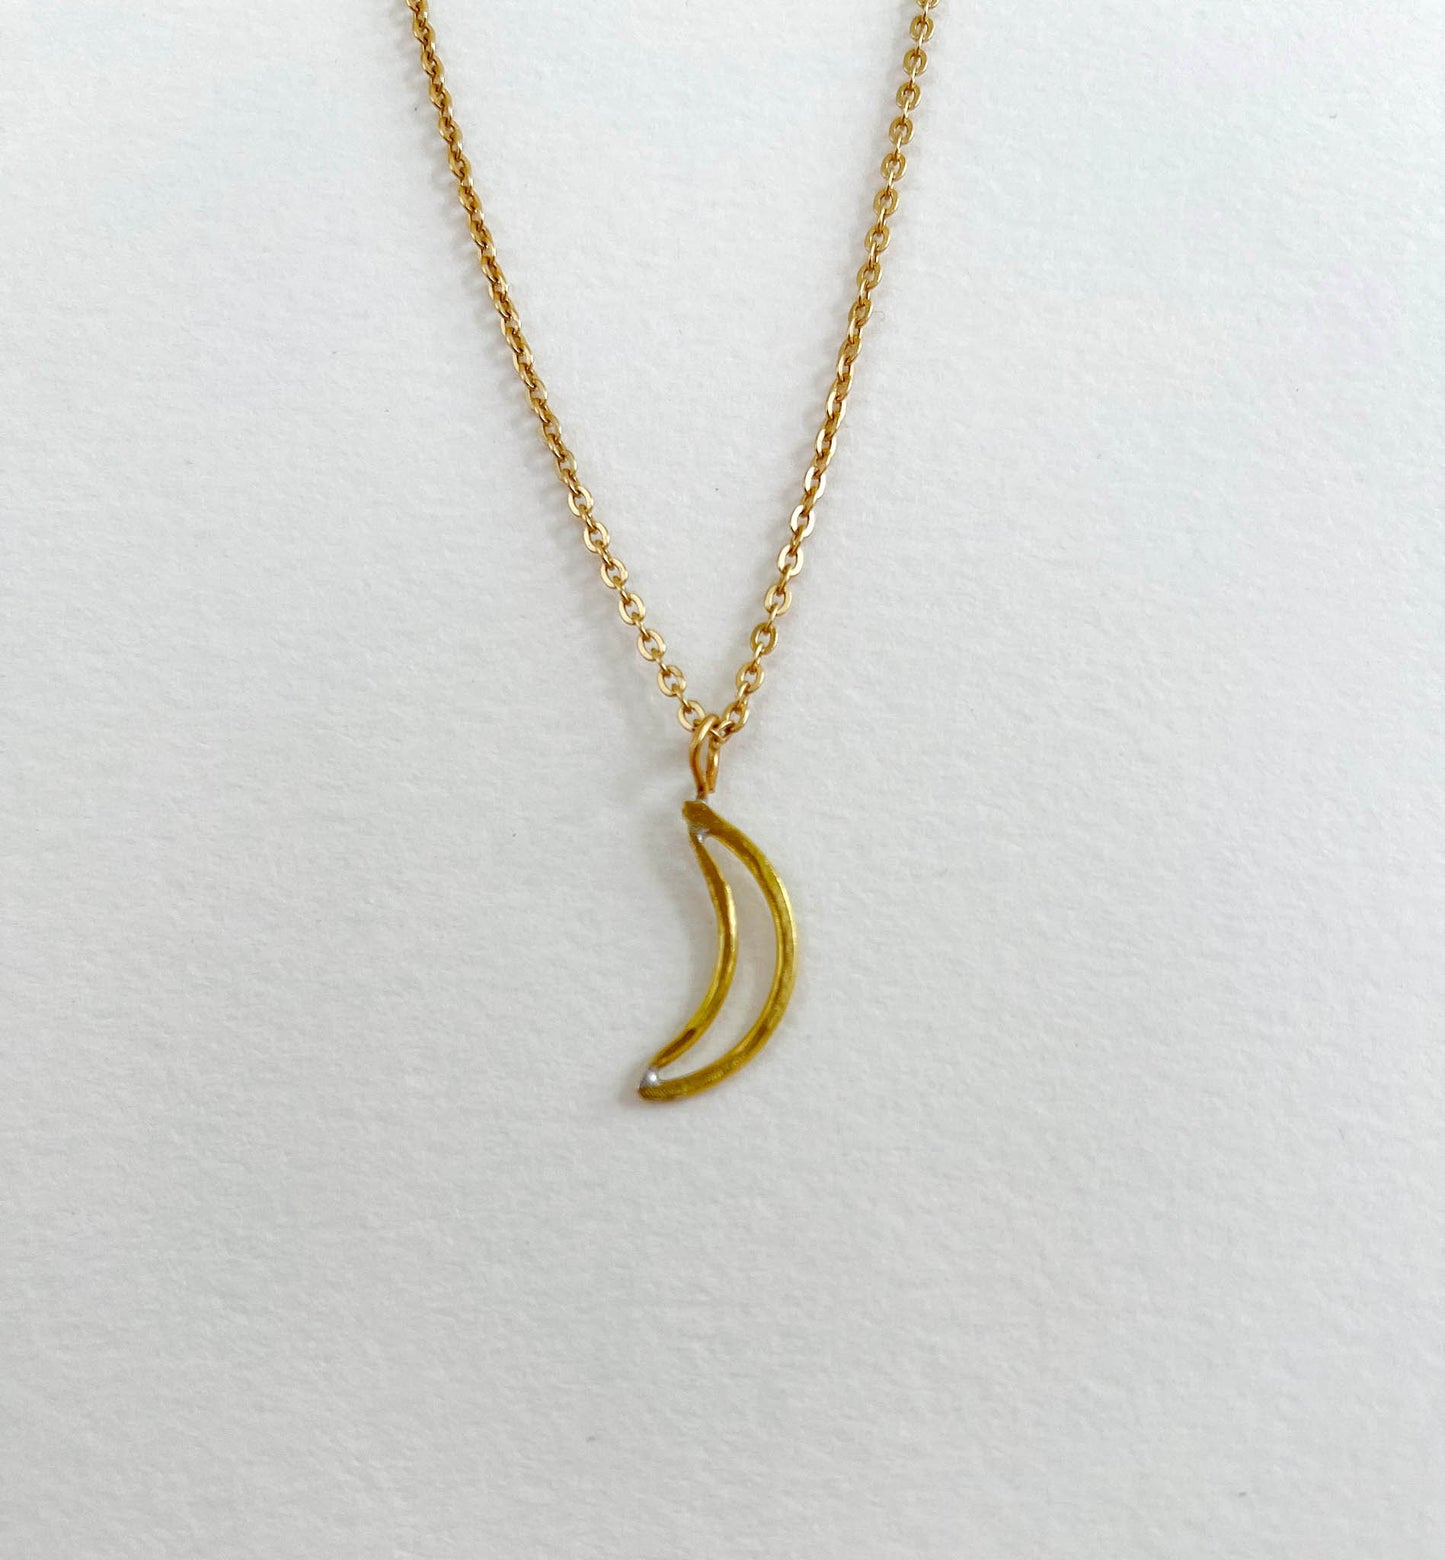 The Dainty Moon Necklace